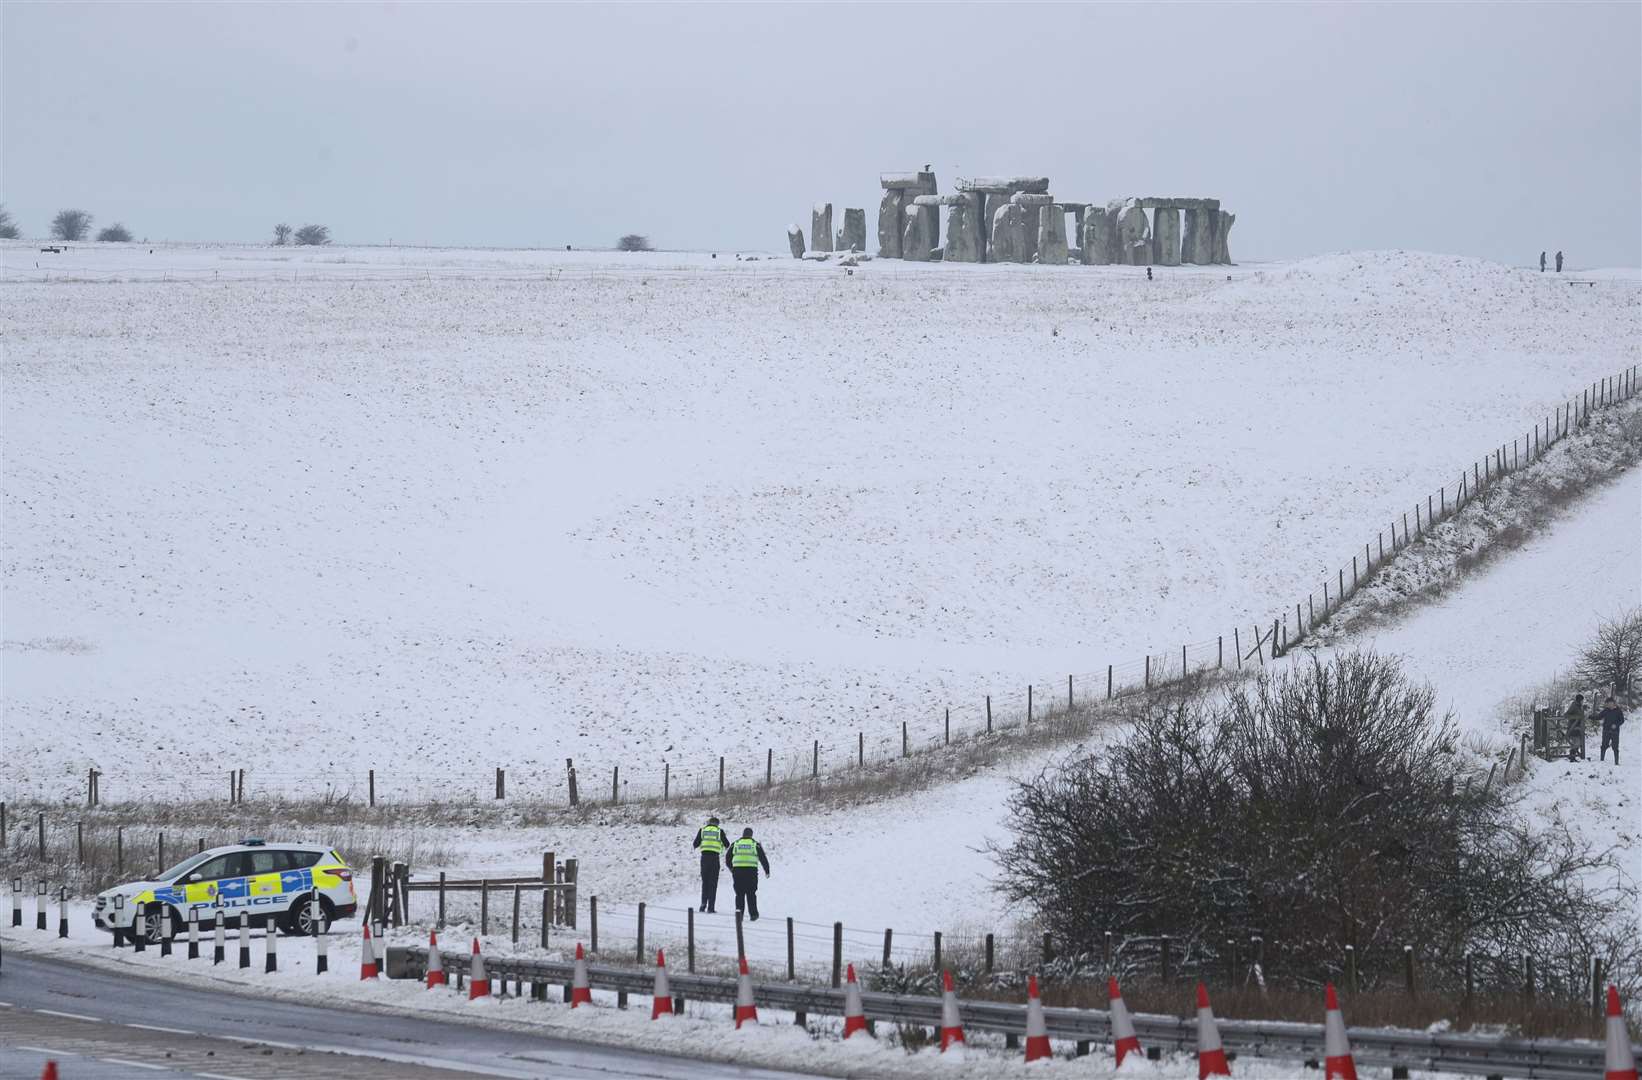 Police at a snowy Stonehenge in Wiltshire (Andrew Matthews/PA)